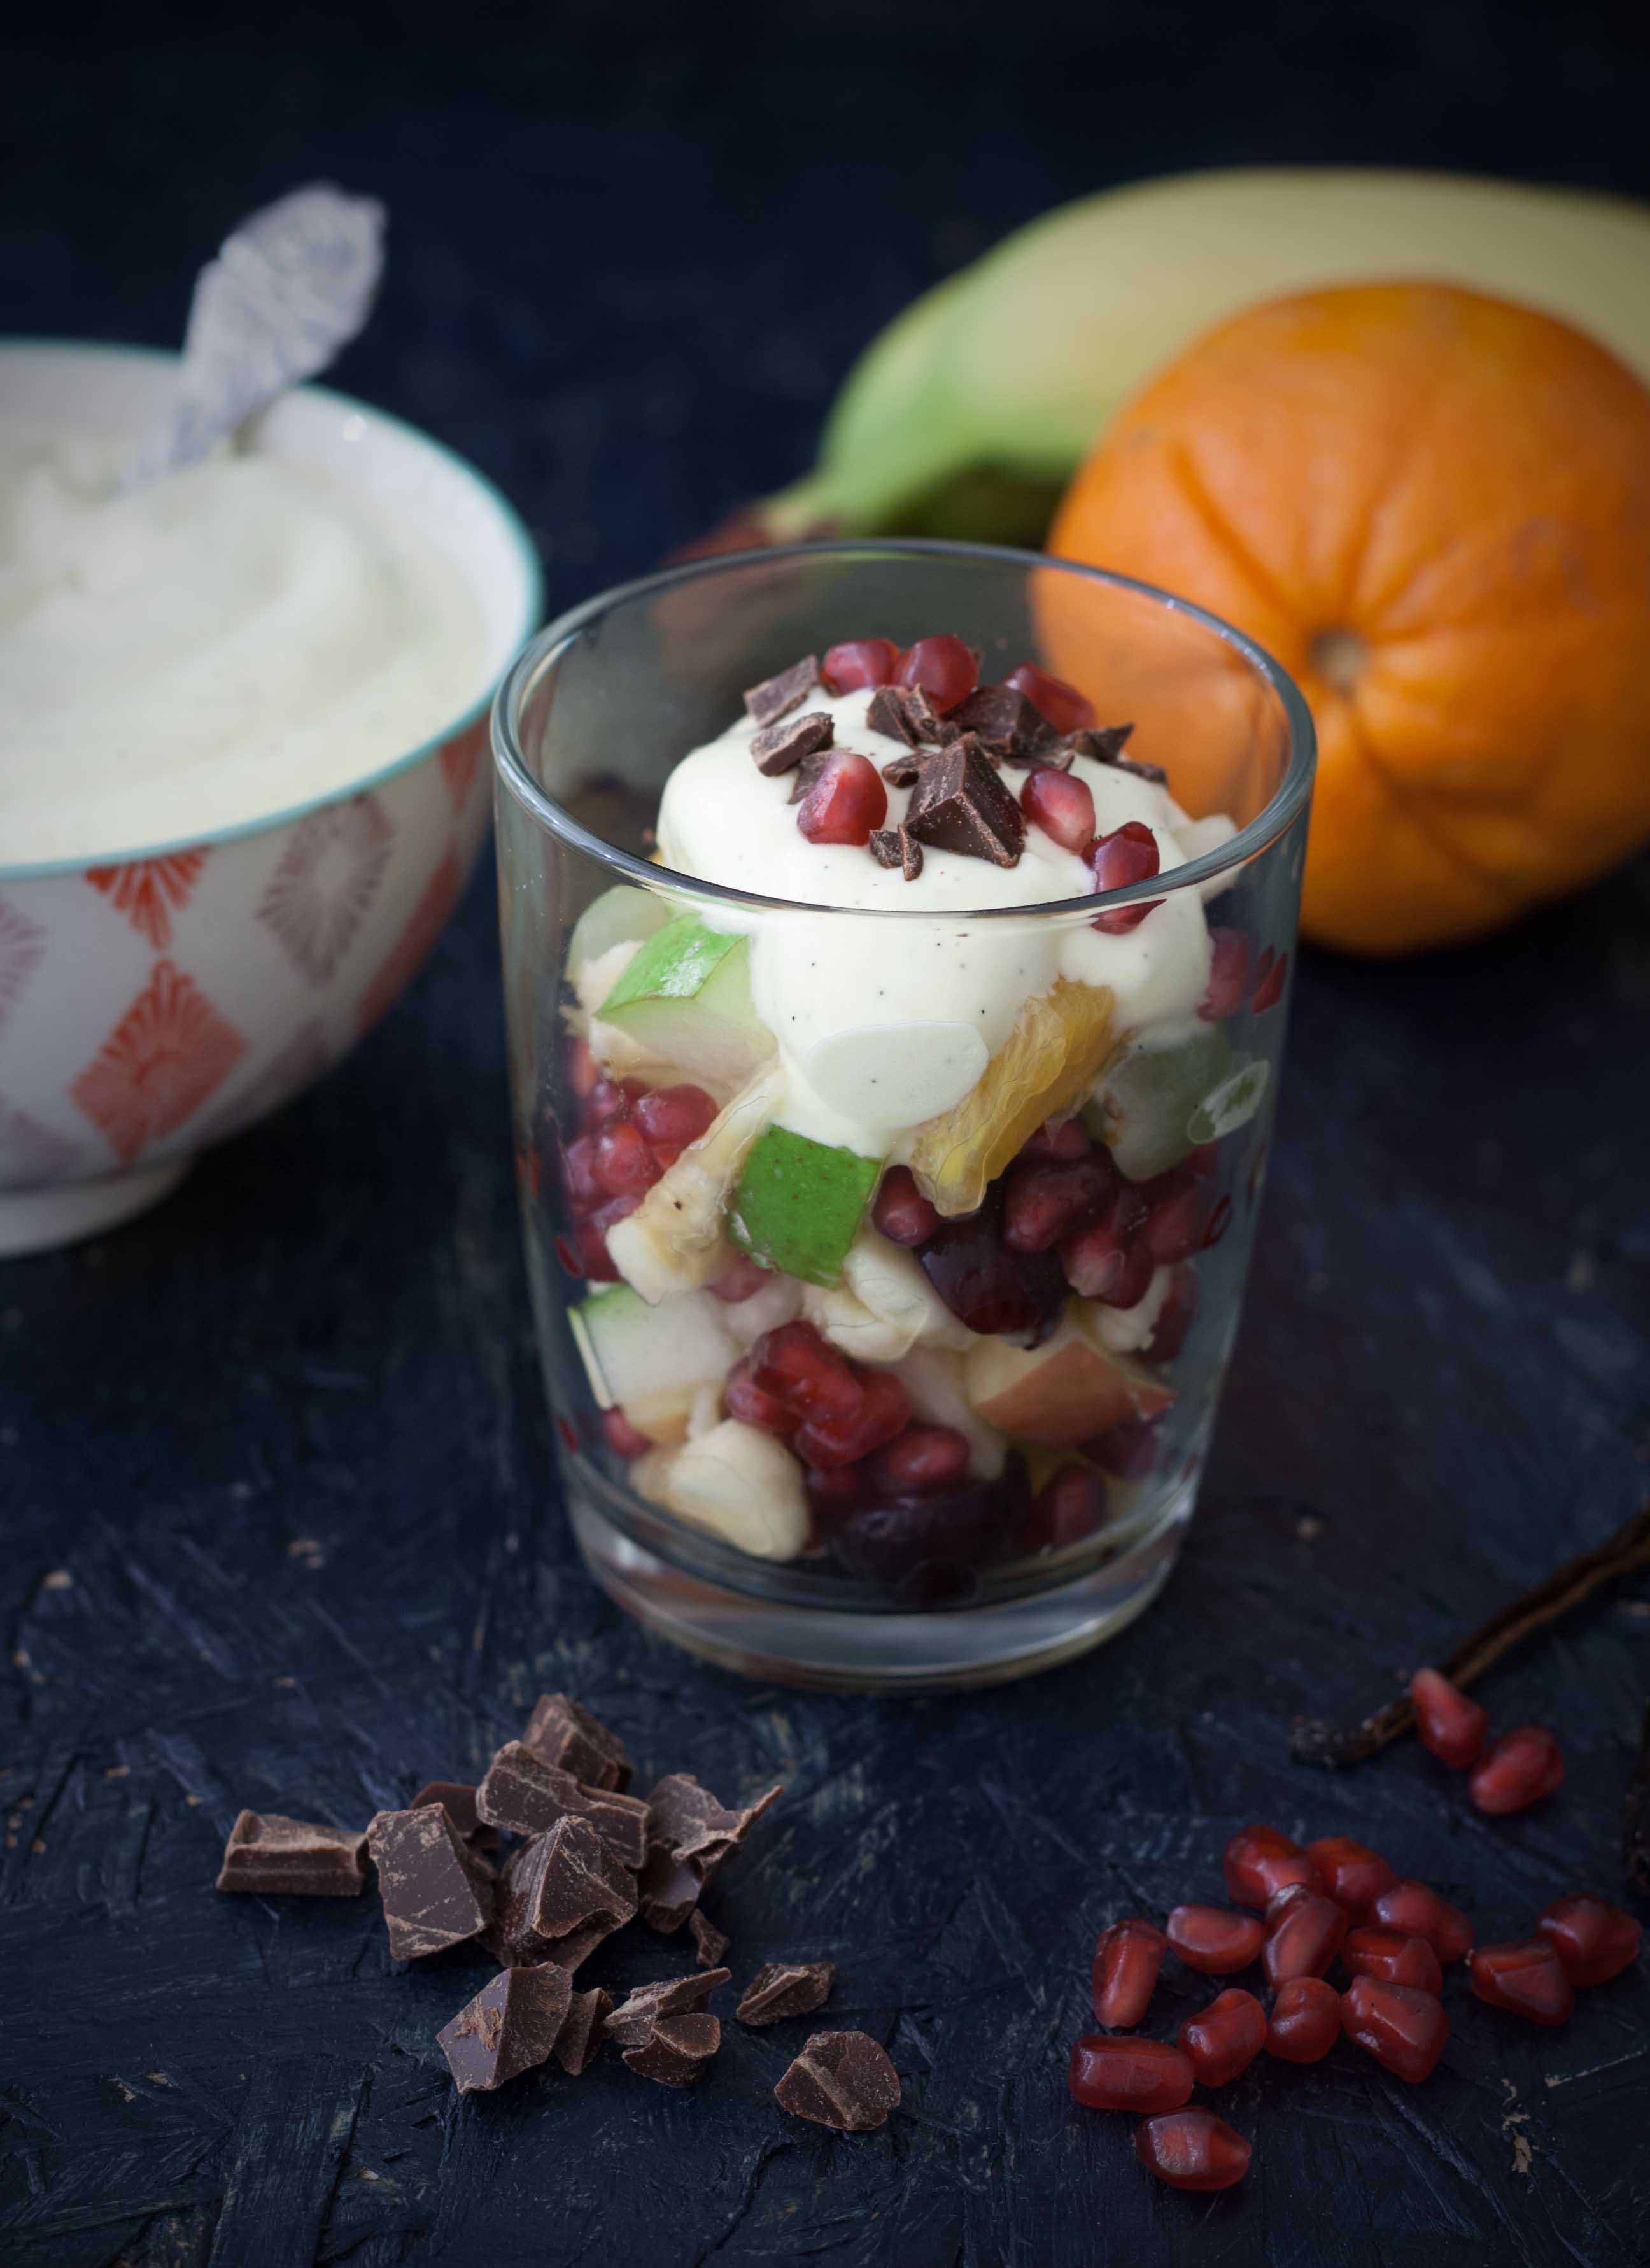 Recipe for Homemade Fruit Salad with Vanilla Cream and Chocolate